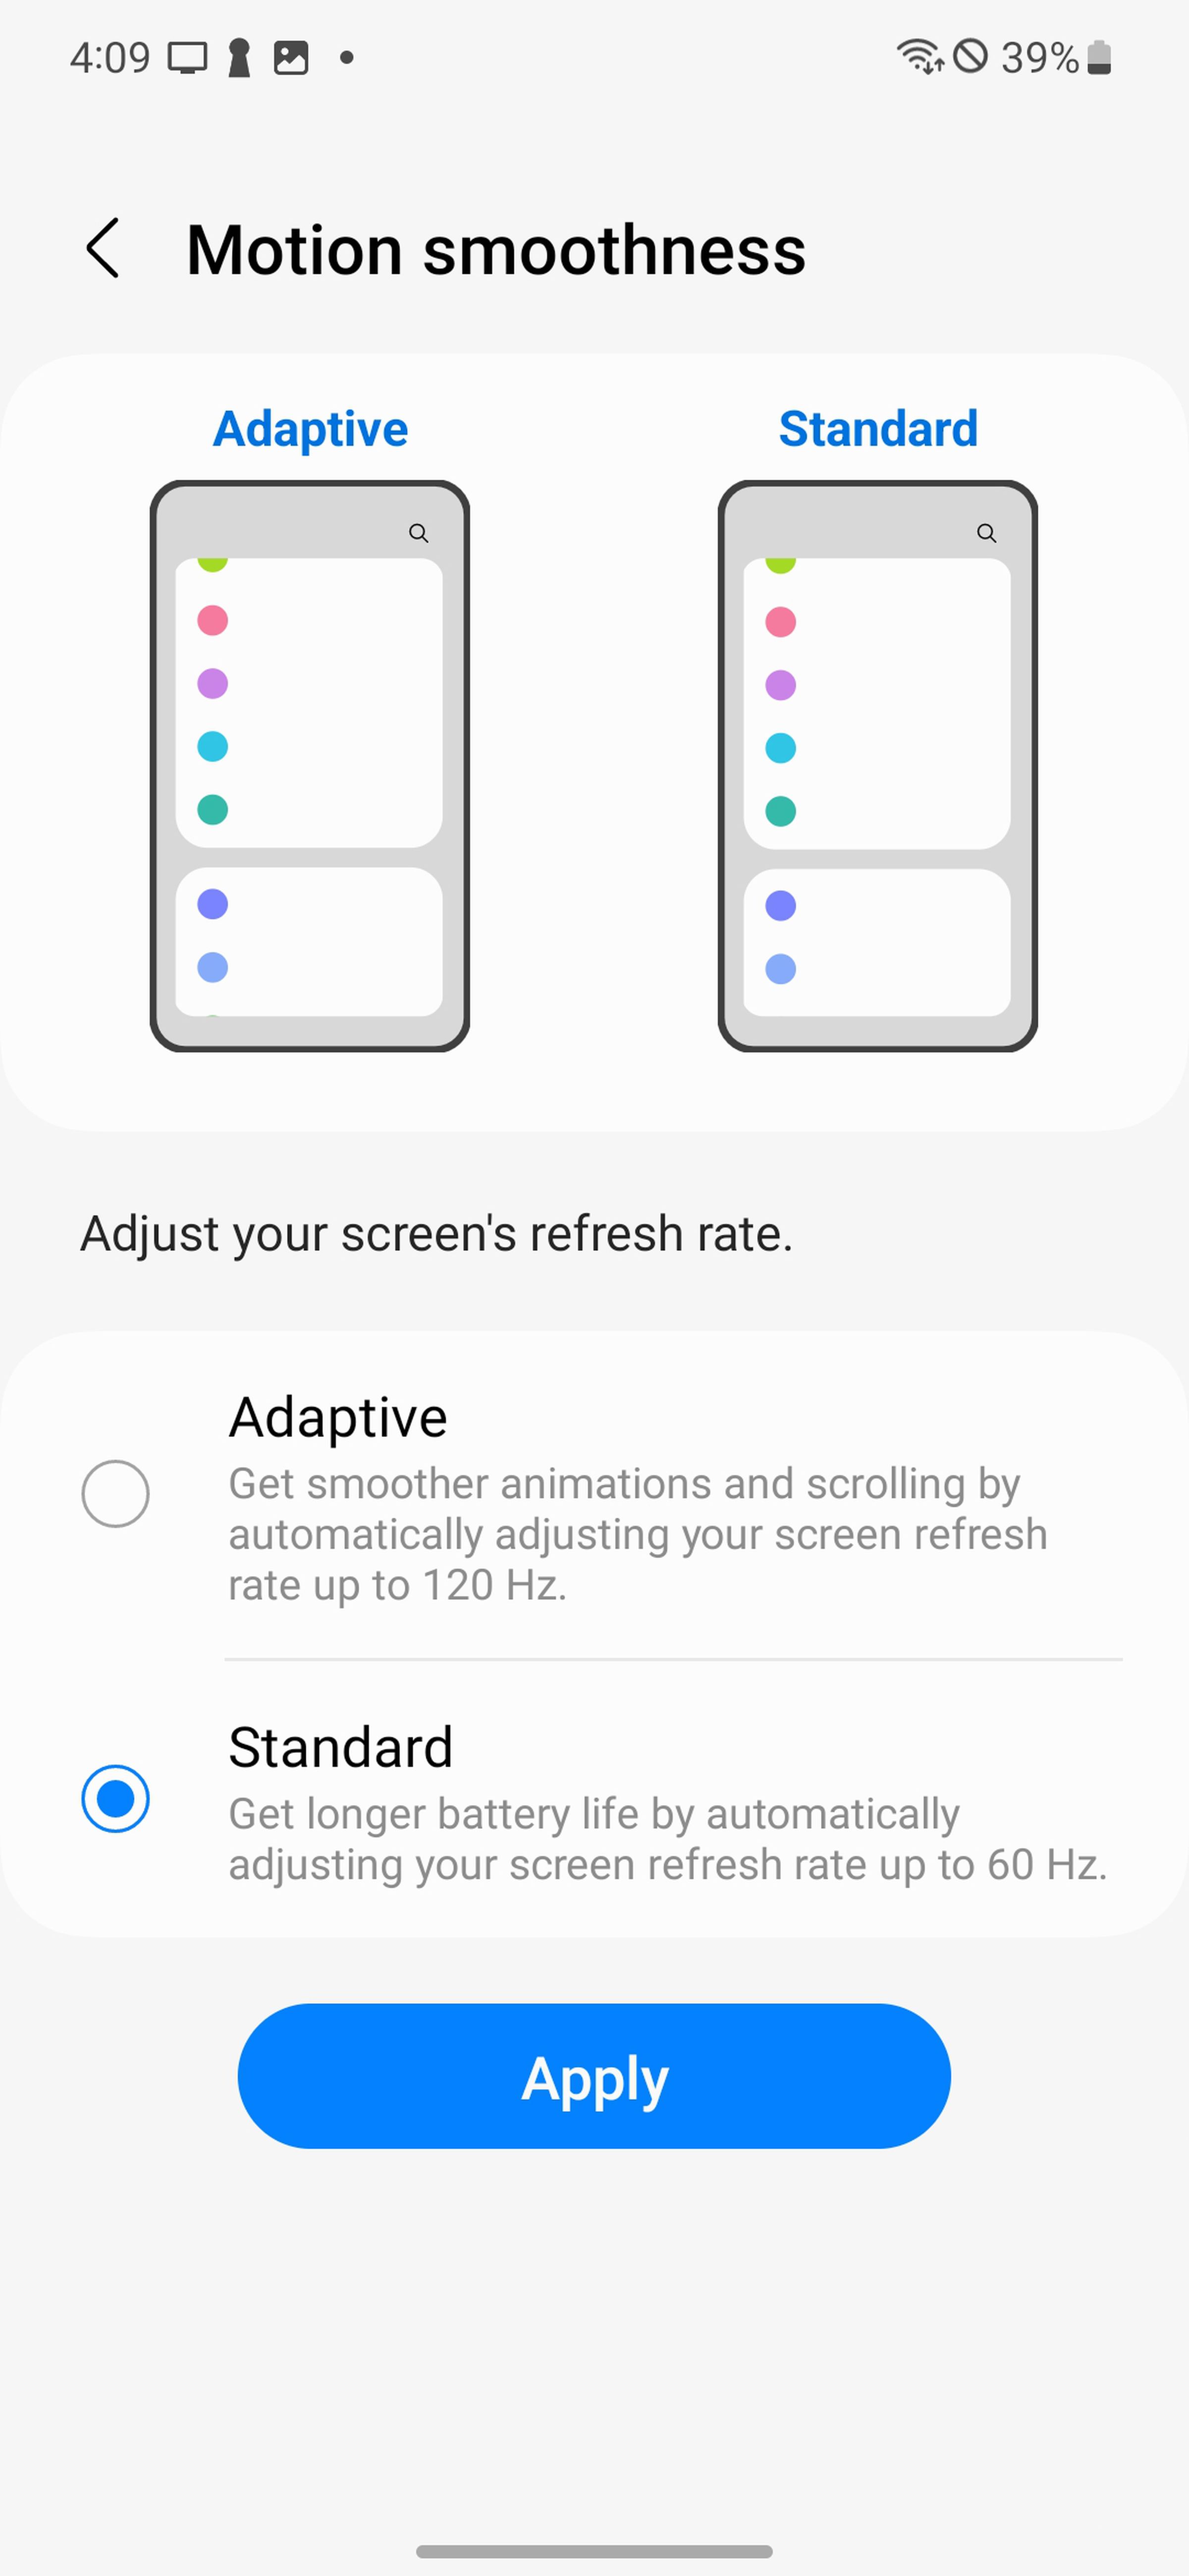 Screen headed Motion smoothness with two images of phones, one labeled Adaptive and one labeled Standard, and options for both below that.